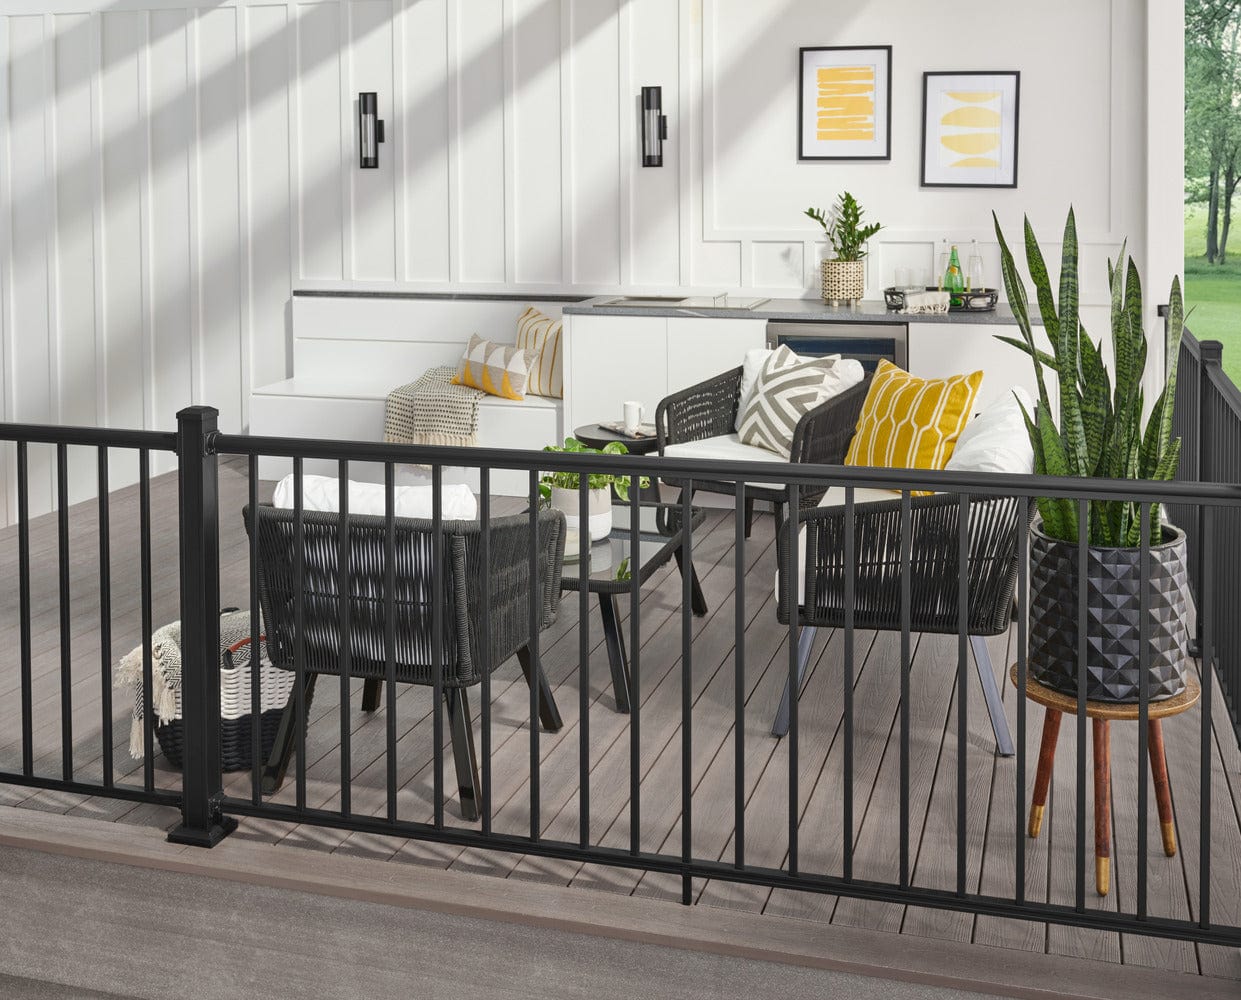 Key-Link Fencing and Railing Outlook Railing 36" Outlook Series Aluminum Deck Railing Kit | Key-Link